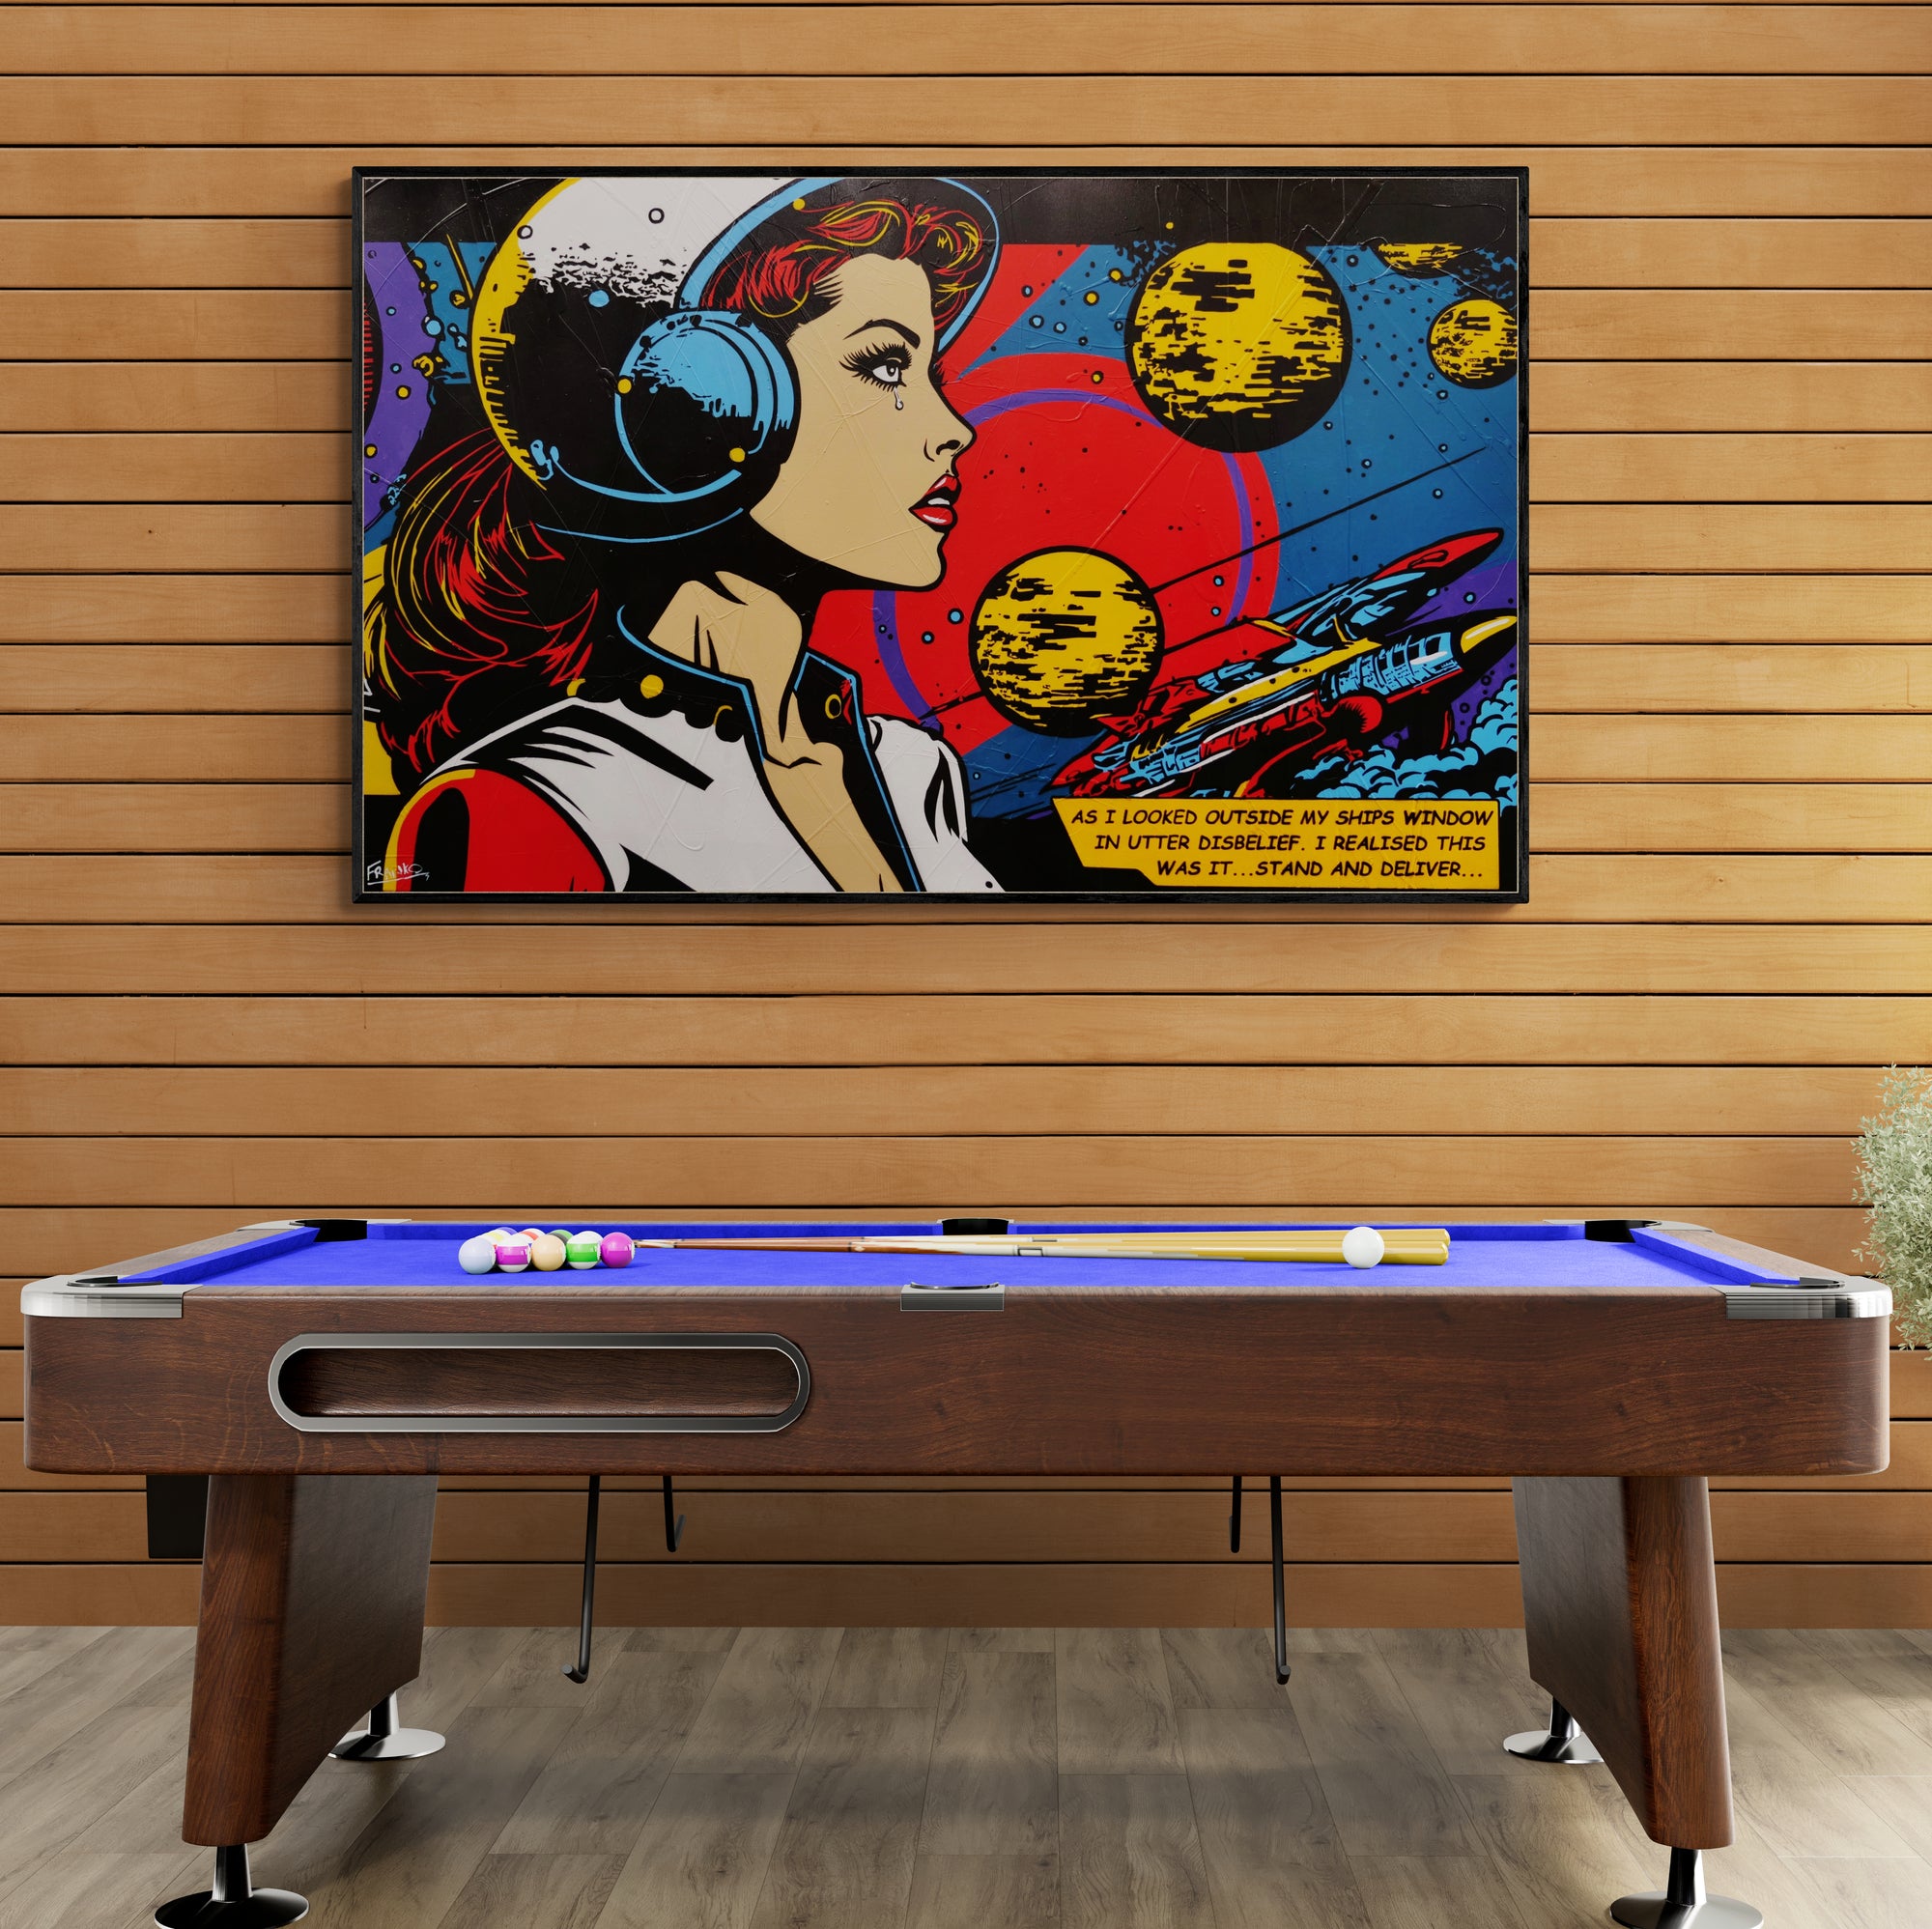 Stand and Deliver ...160cm x 100cm Space Cadet Textured Urban Pop Art Painting (SOLD)